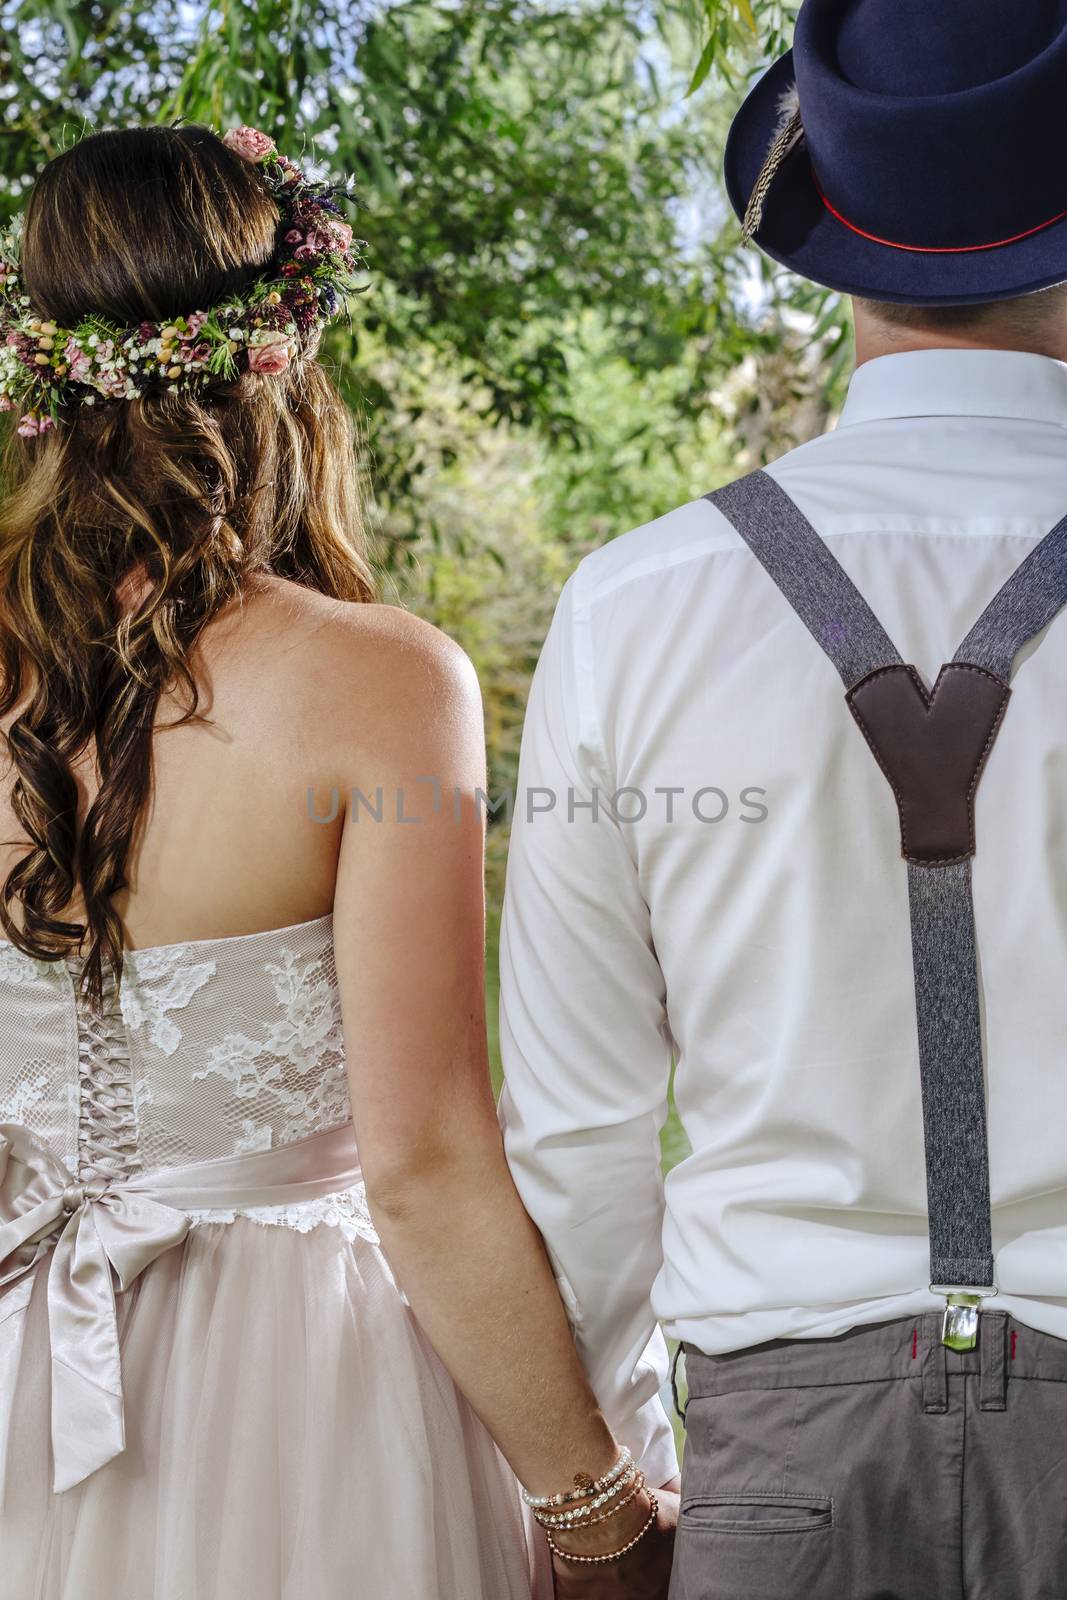 Cropped photo of a beautiful couple from behind on their wedding day.